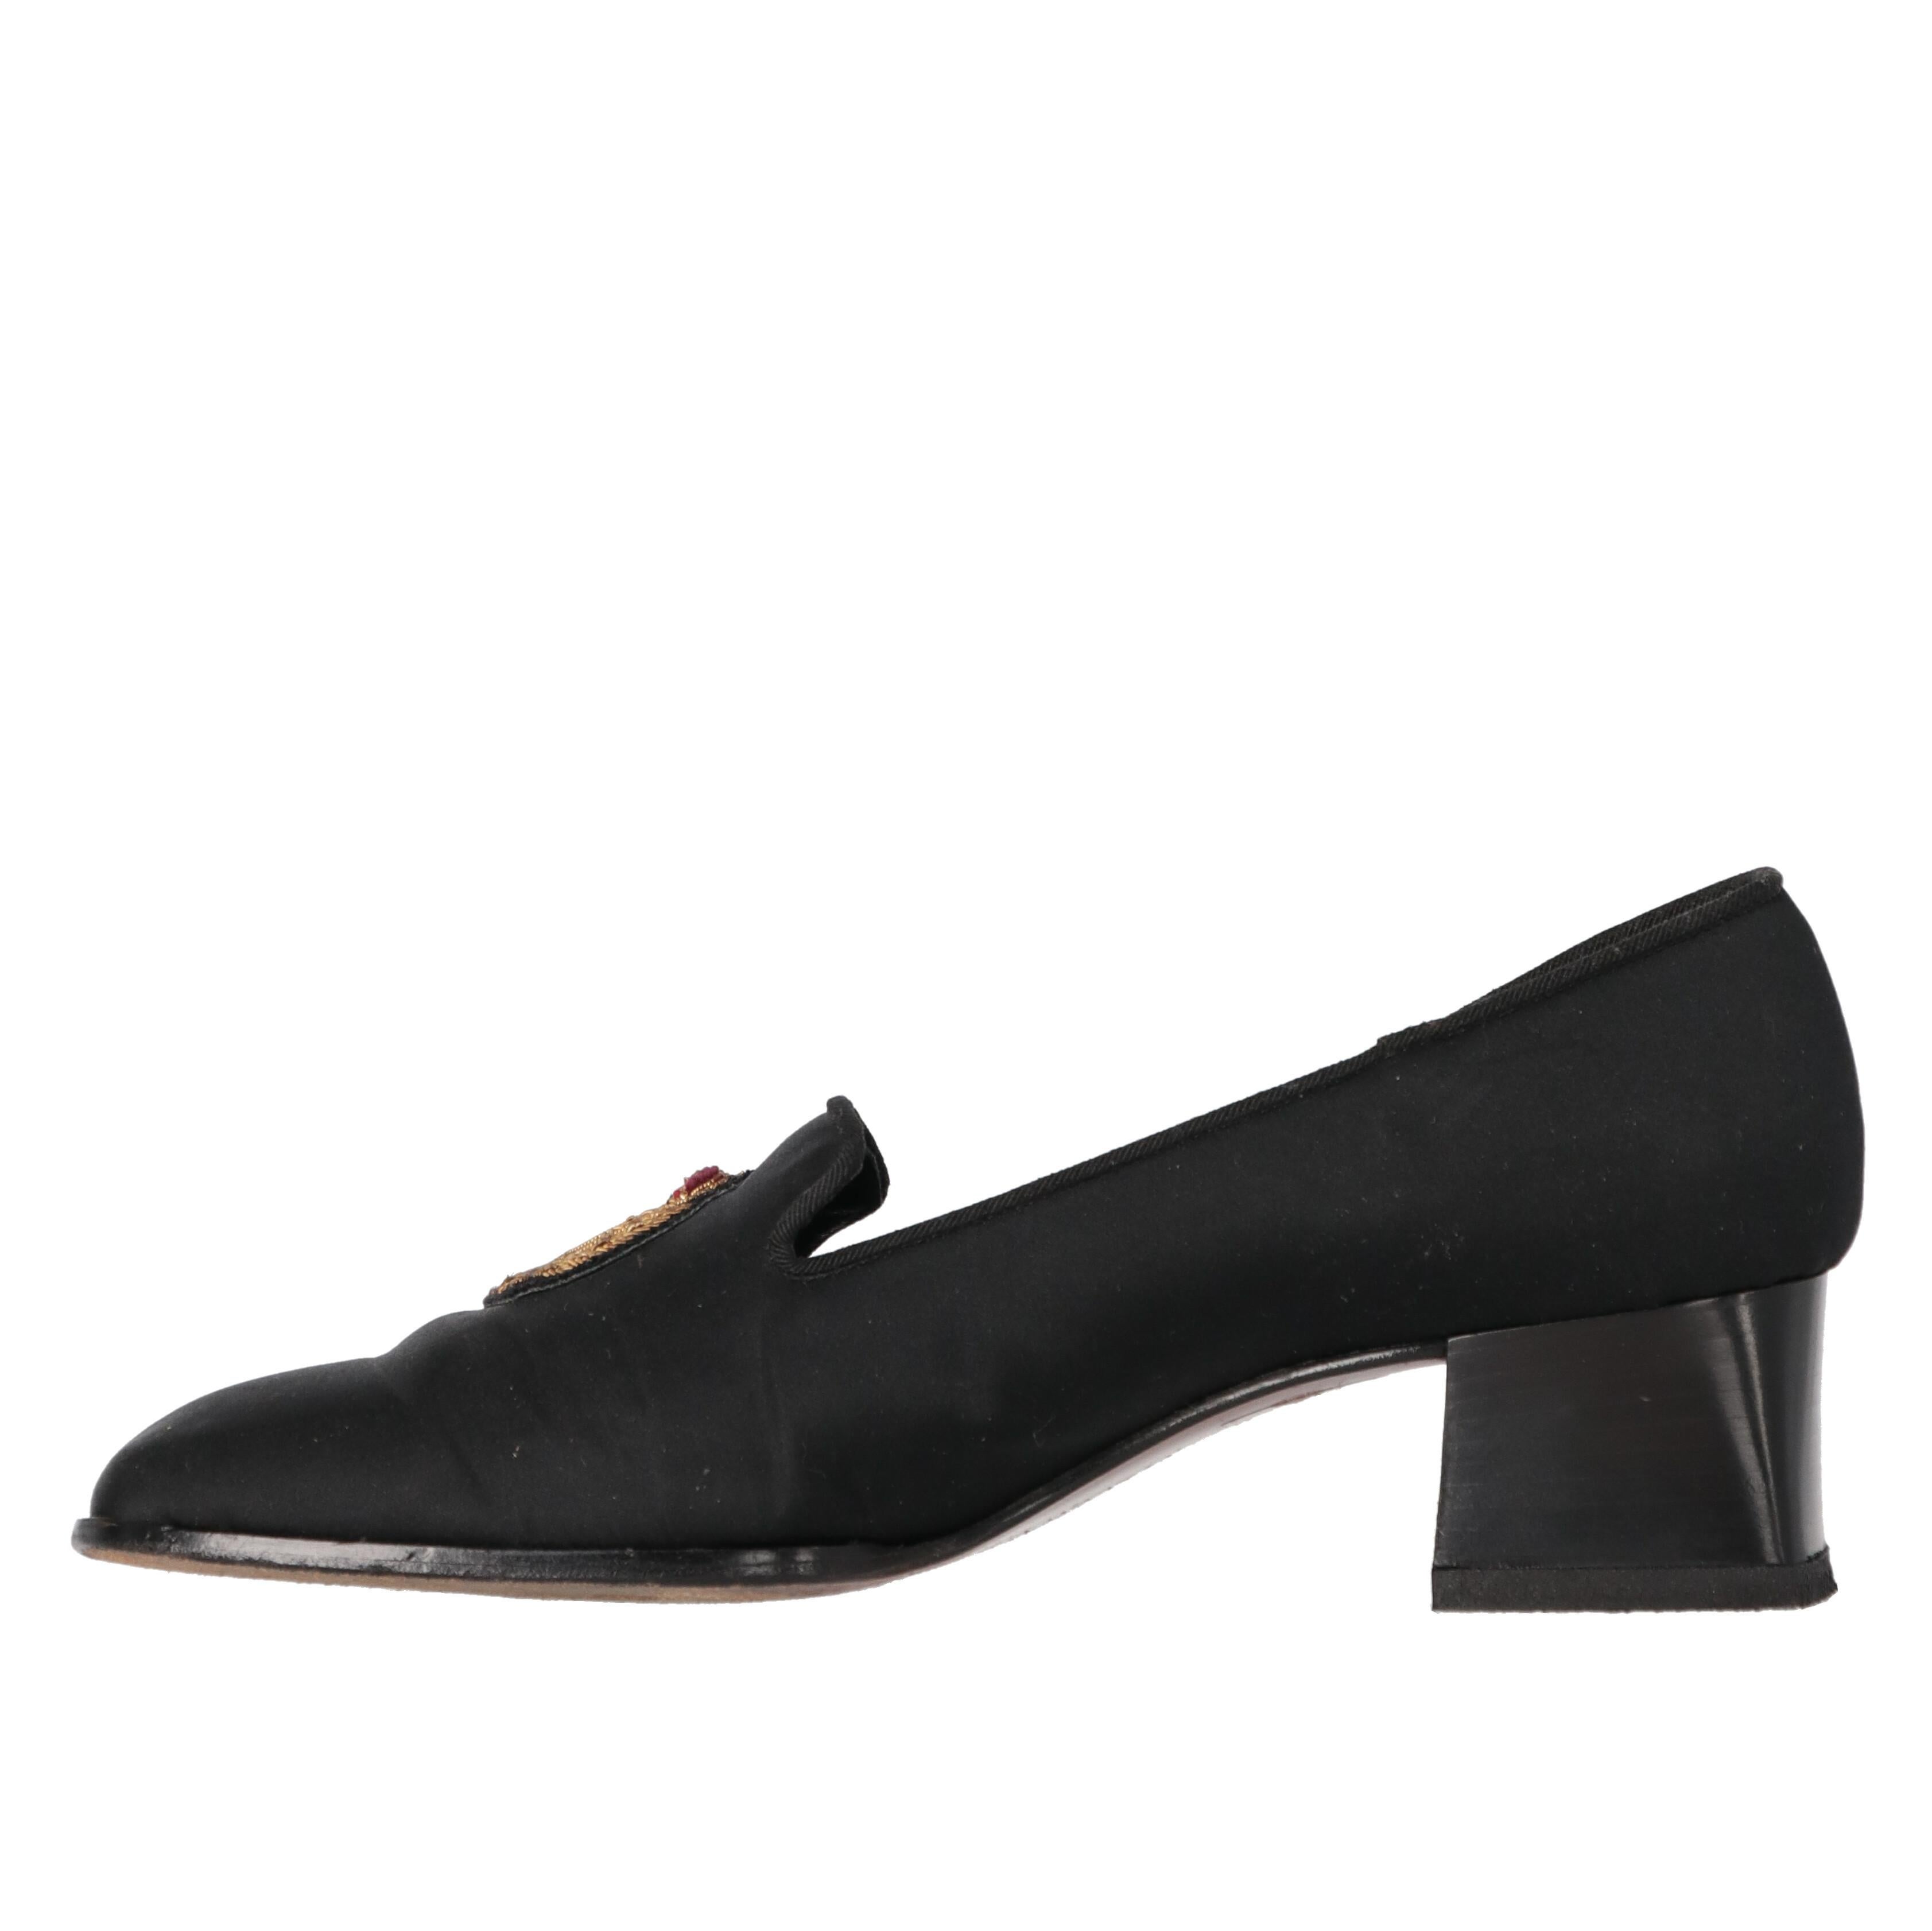 Ralph Lauren black satin heeled loafers. Square toe with embroidered decorative patch and wide heel.

The shoes show signs of wear and wrinkles on the leather, as shown in the pictures.
Years: 90s

Size: 39 EU

Heel height: 4,5 cm
Insole: 25 cm